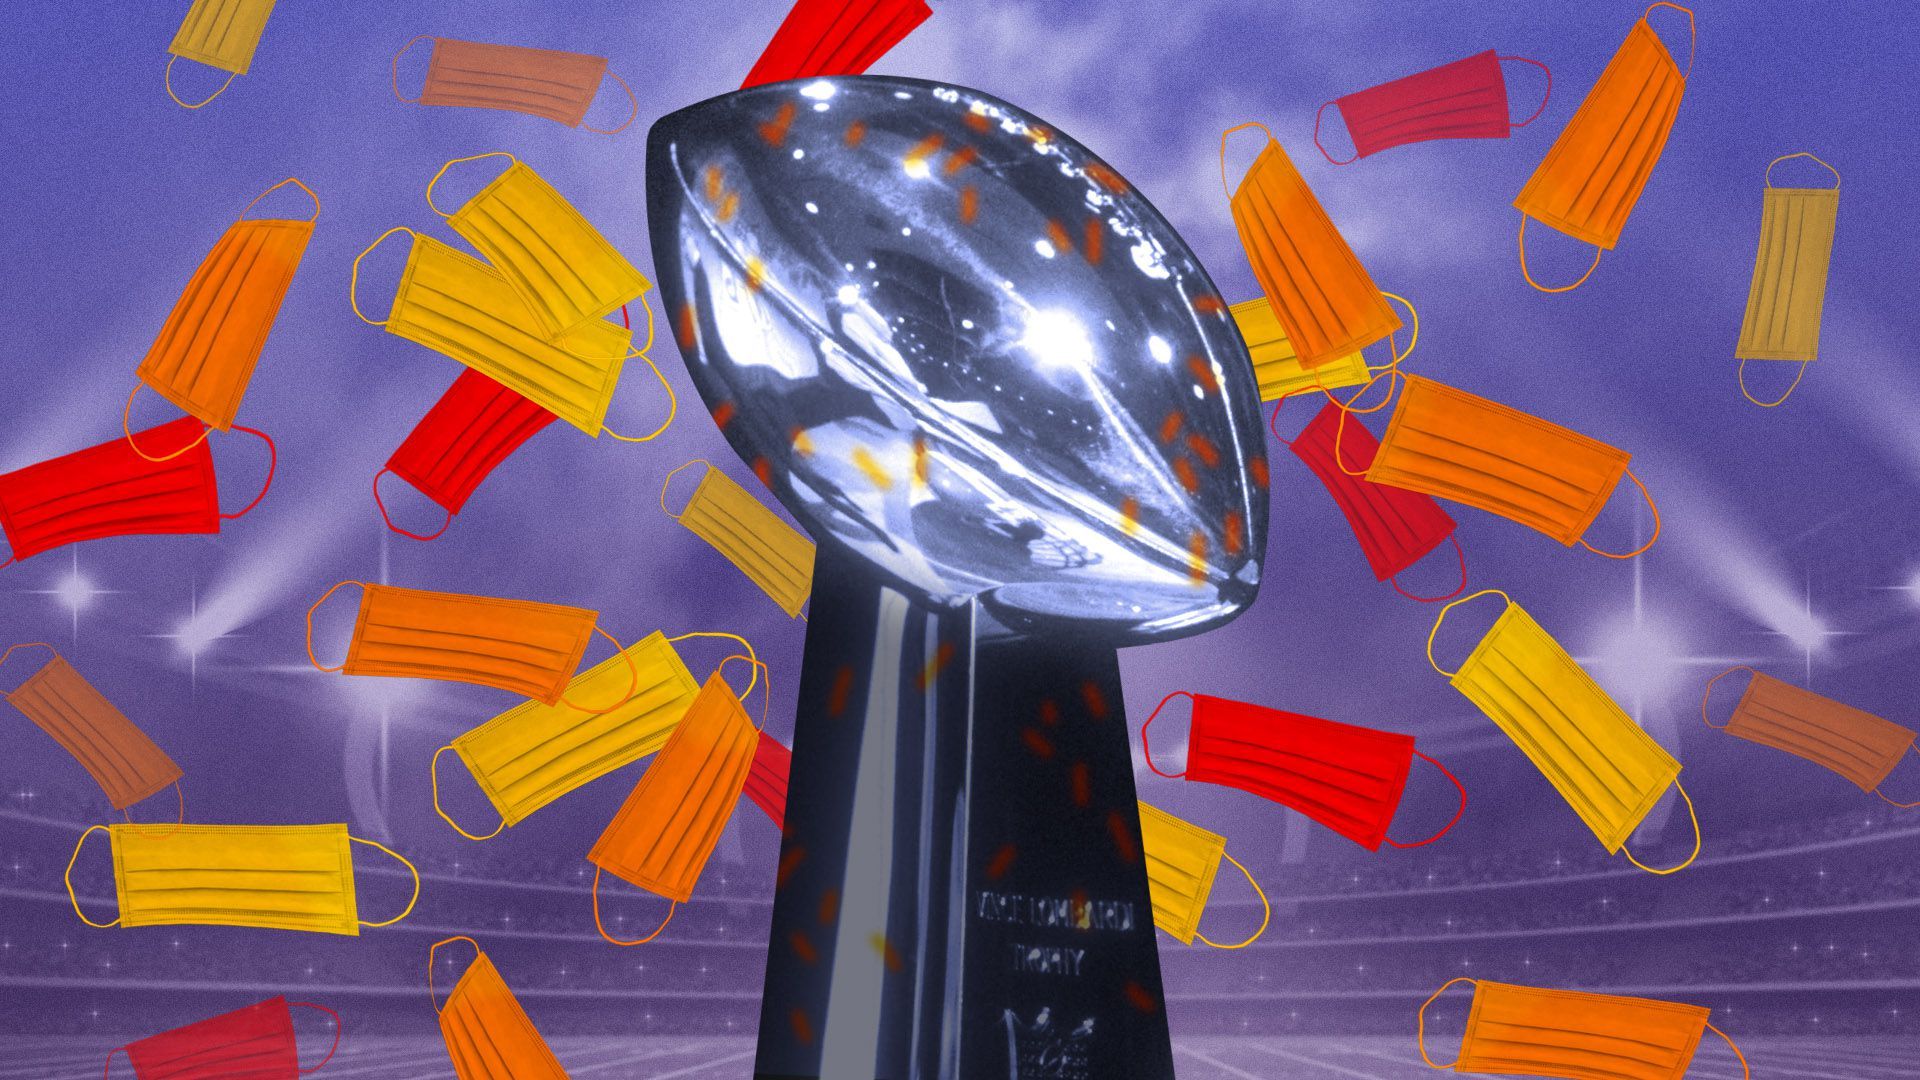 Illustration of the Vince Lombardi trophy in a stadium with masks falling like confetti